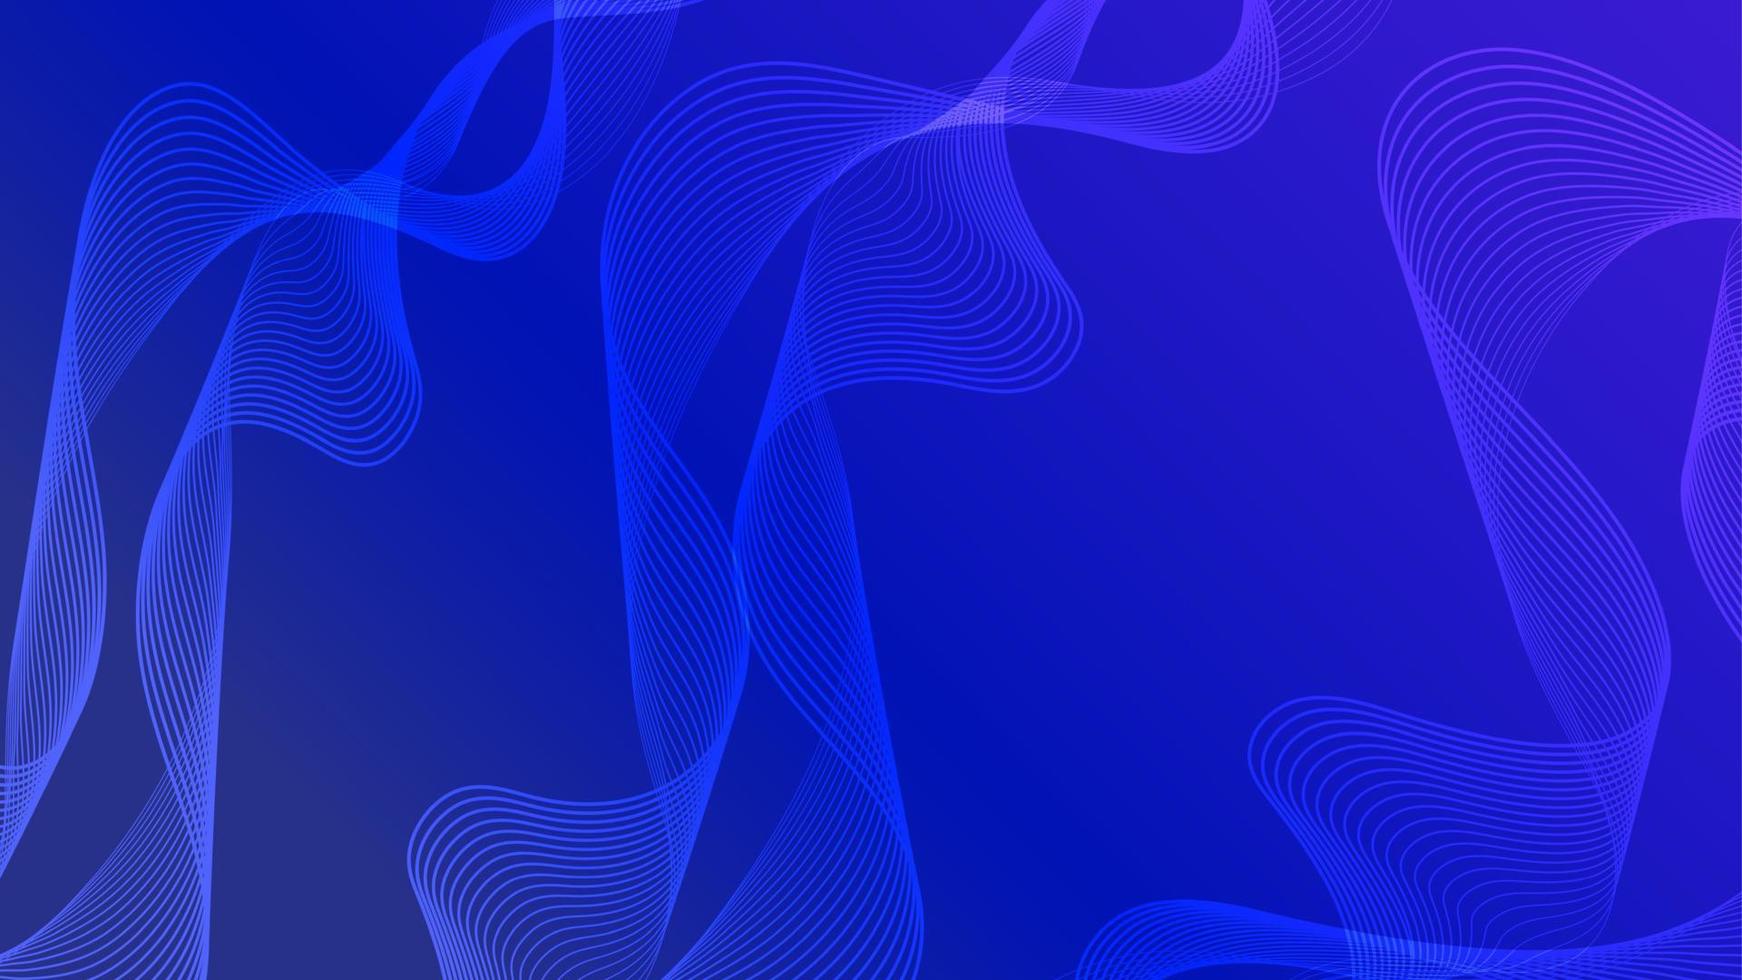 Abstract blue textured geometrical background. Vector blurry geometric background design